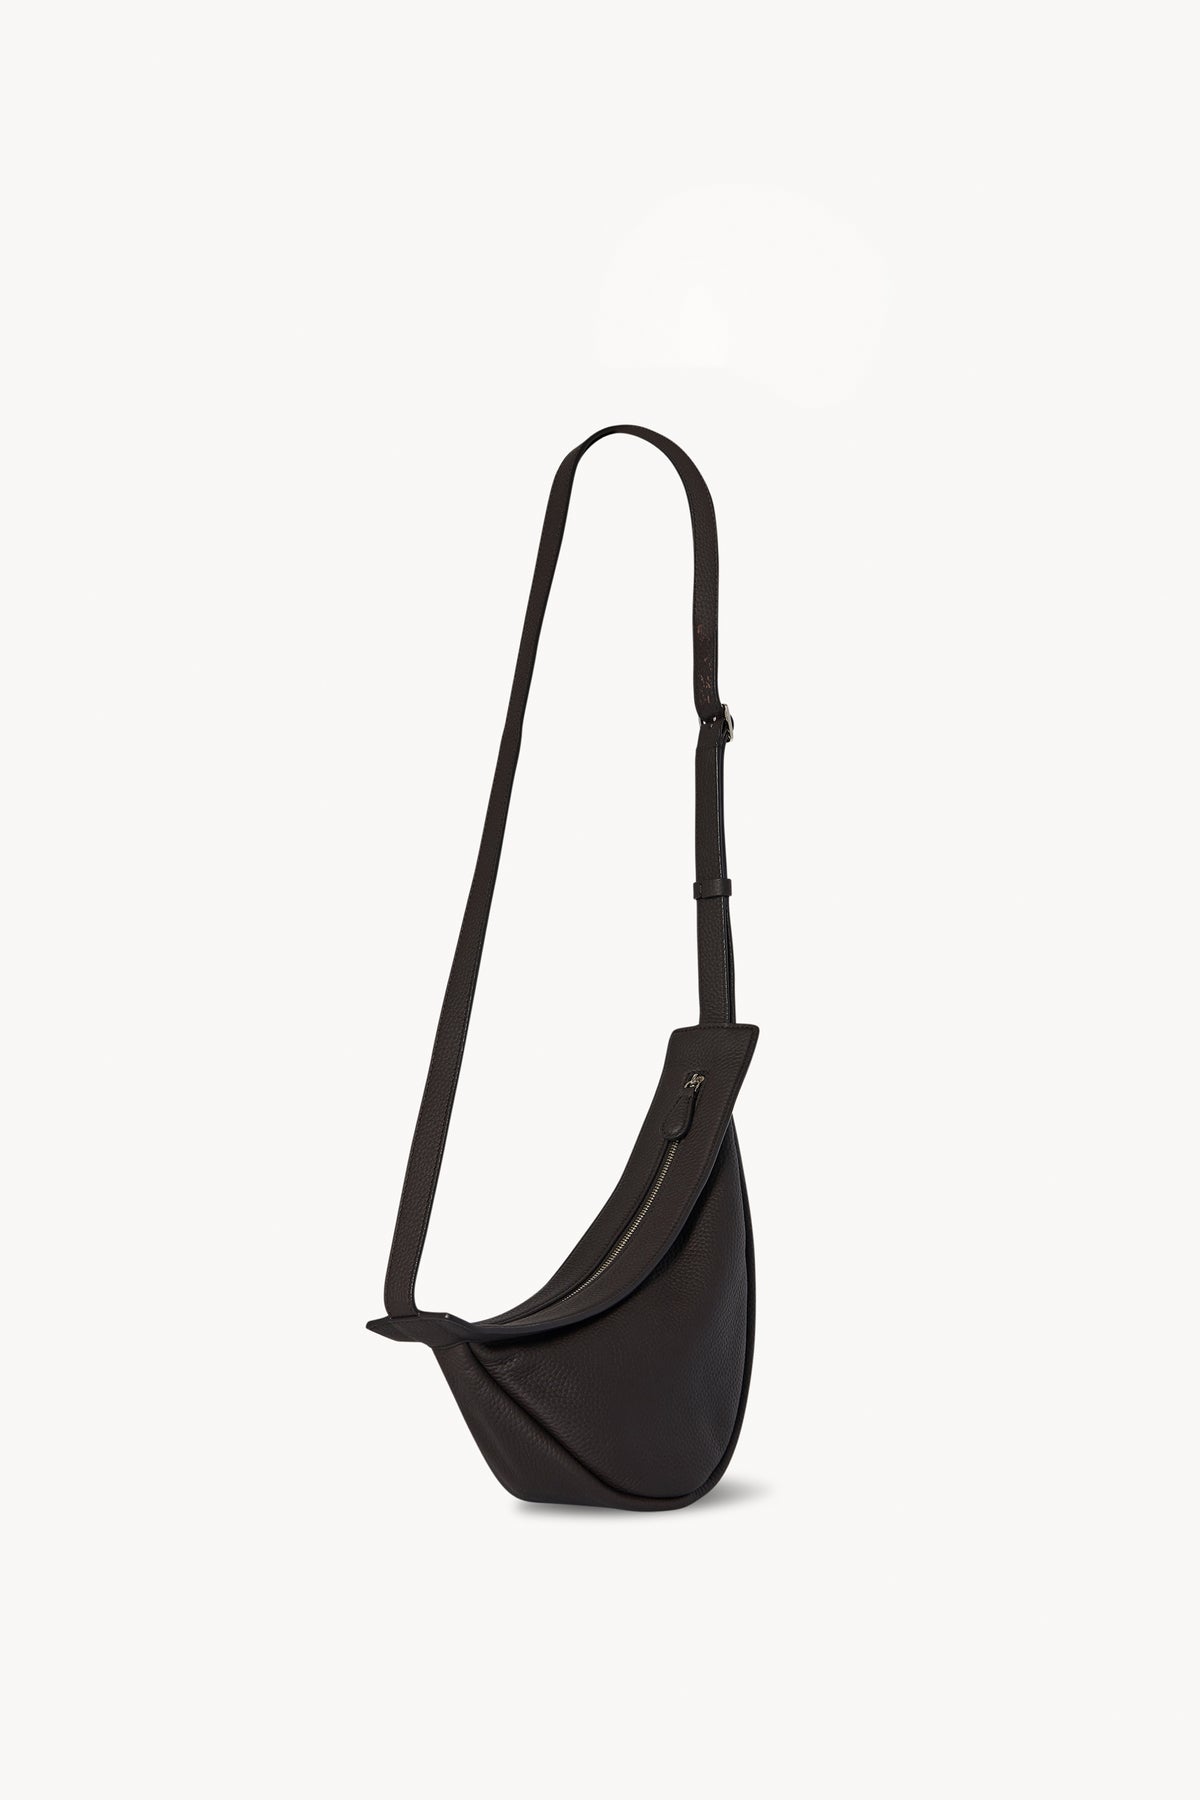 Is The Row's Slouchy Banana Bag the Next It Bag?